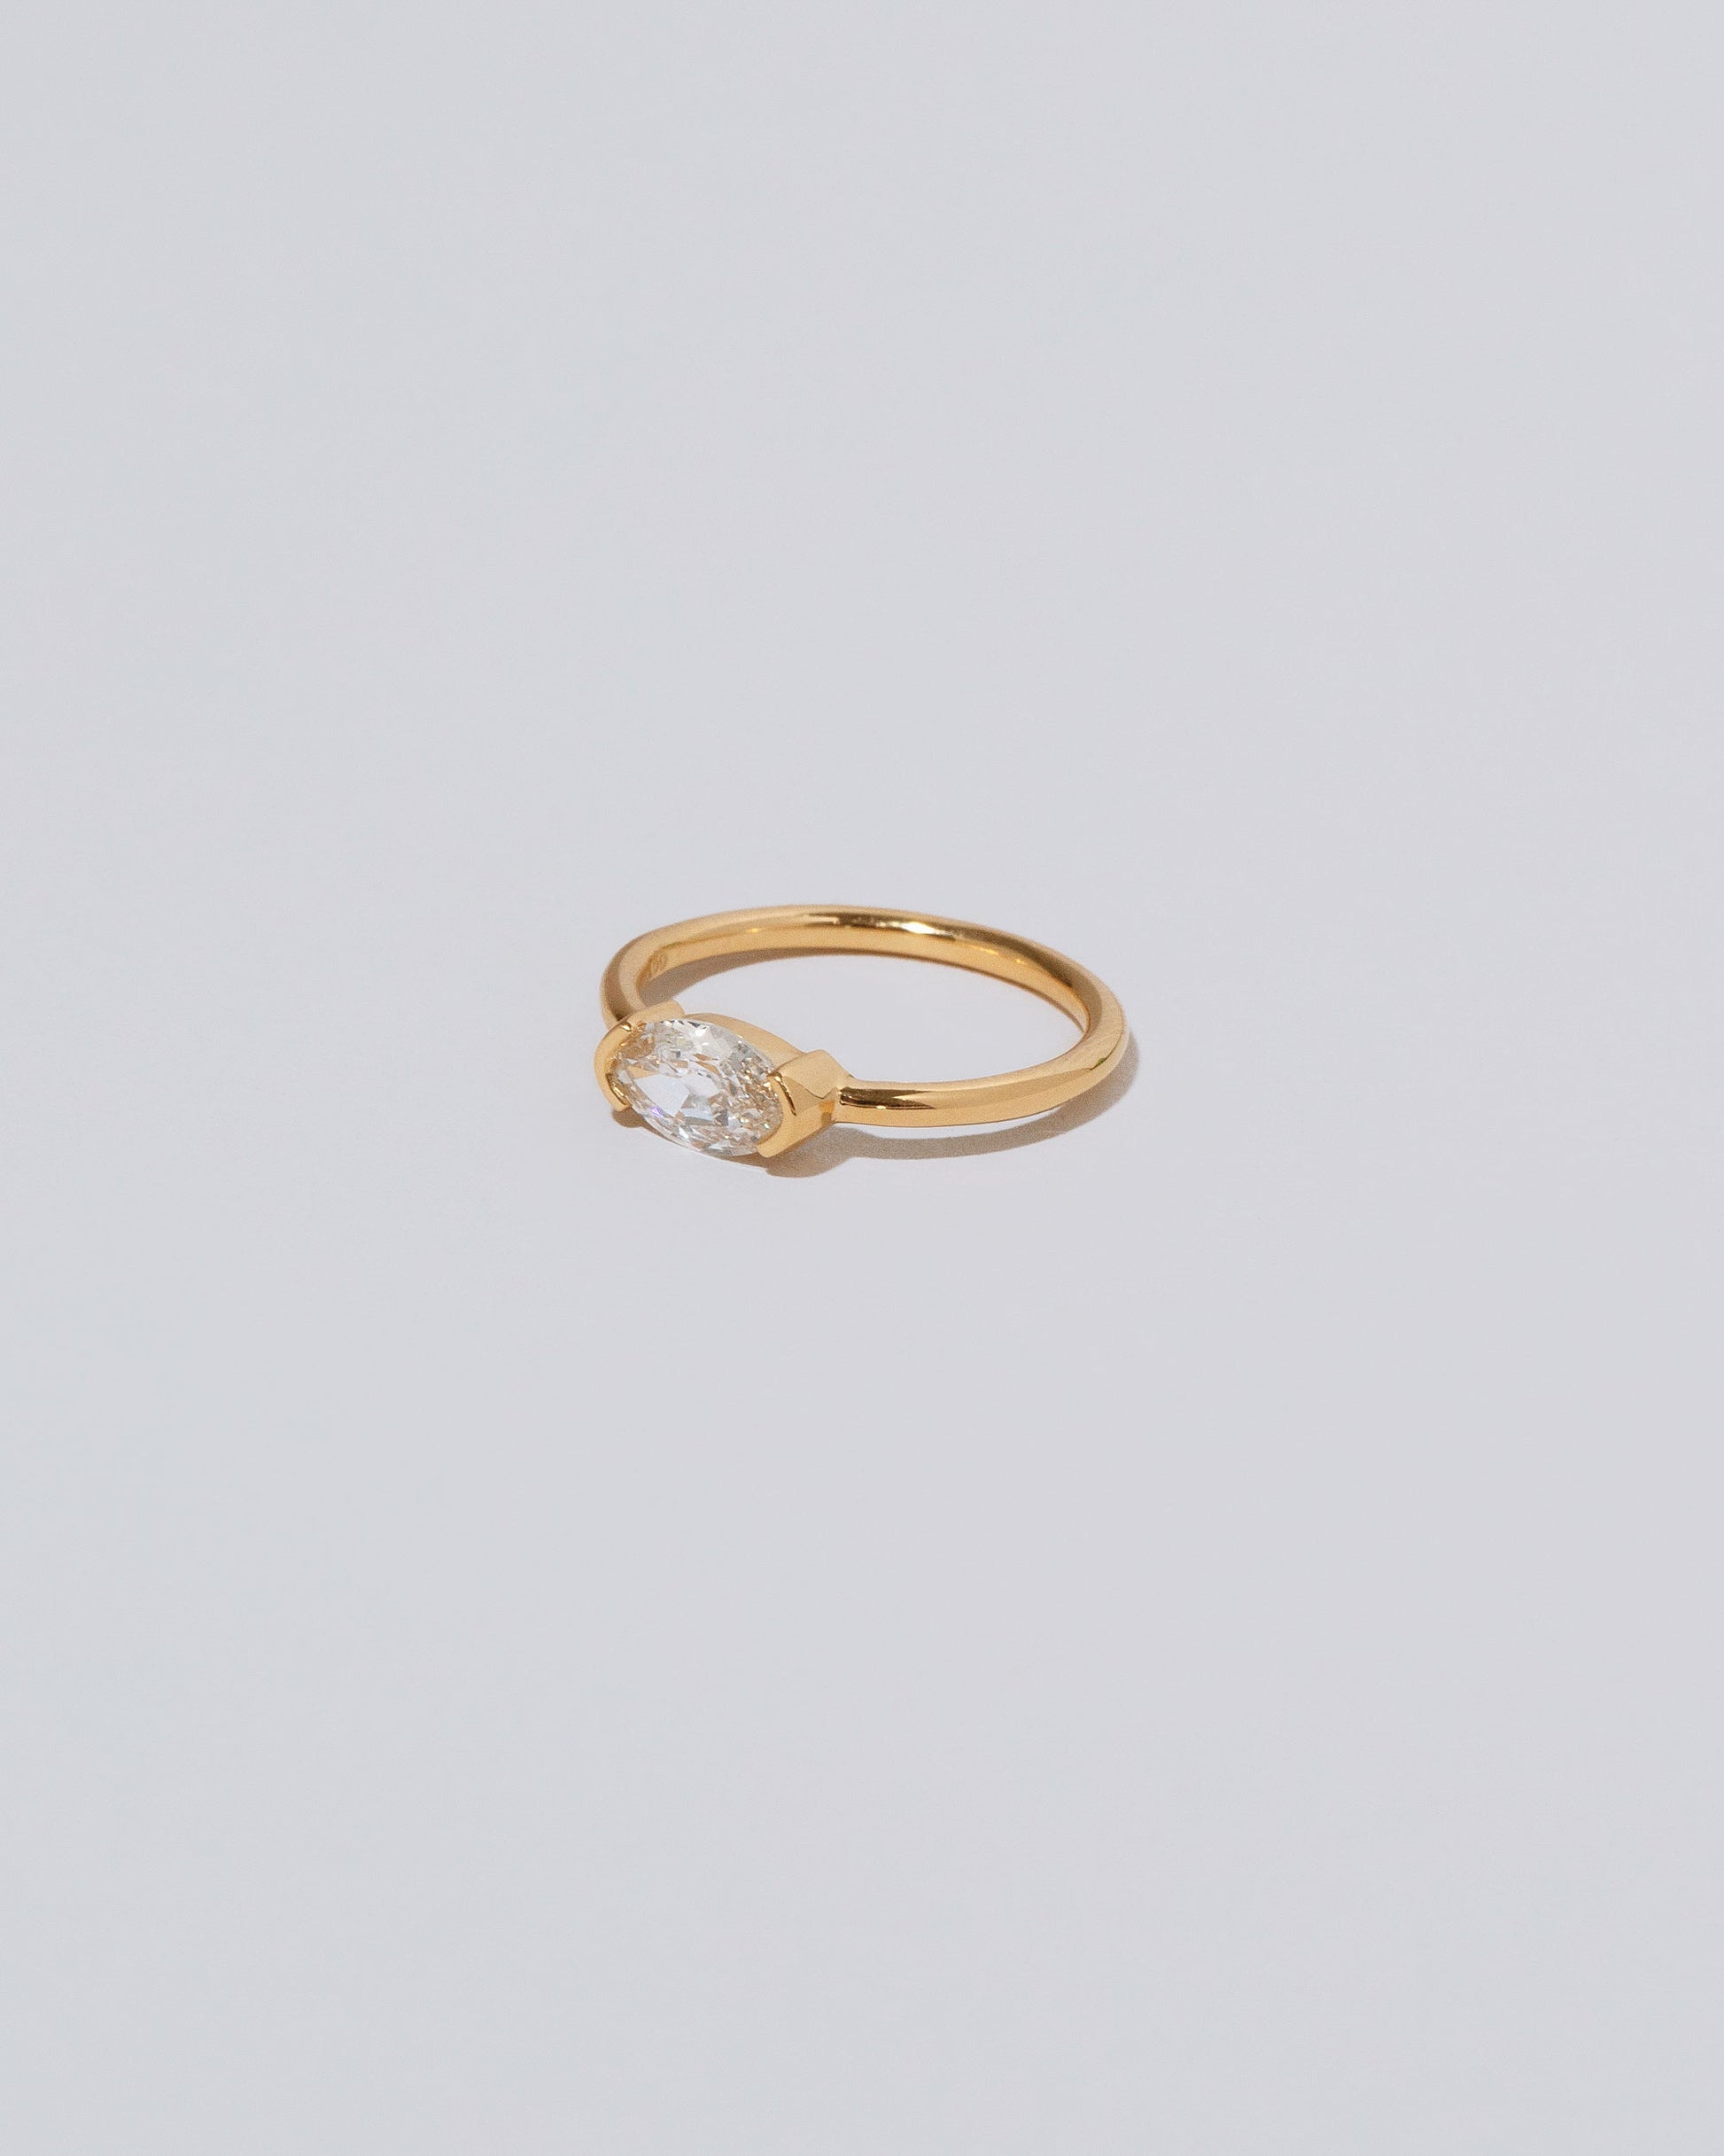 Product photo of the De Coté Ring on light color background